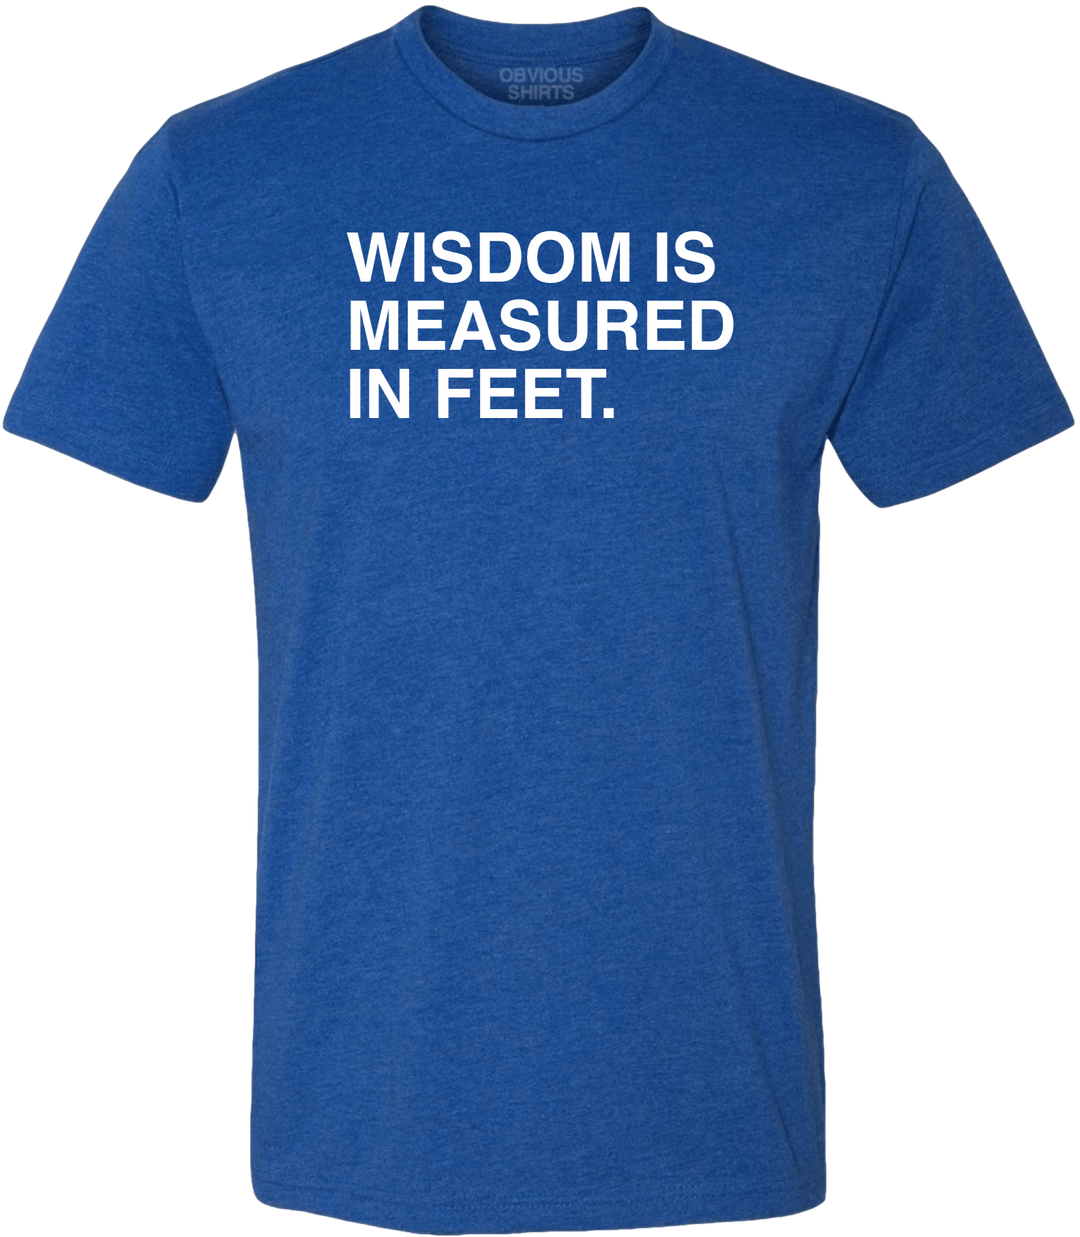 WISDOM IS MEASURED IN FEET. - OBVIOUS SHIRTS